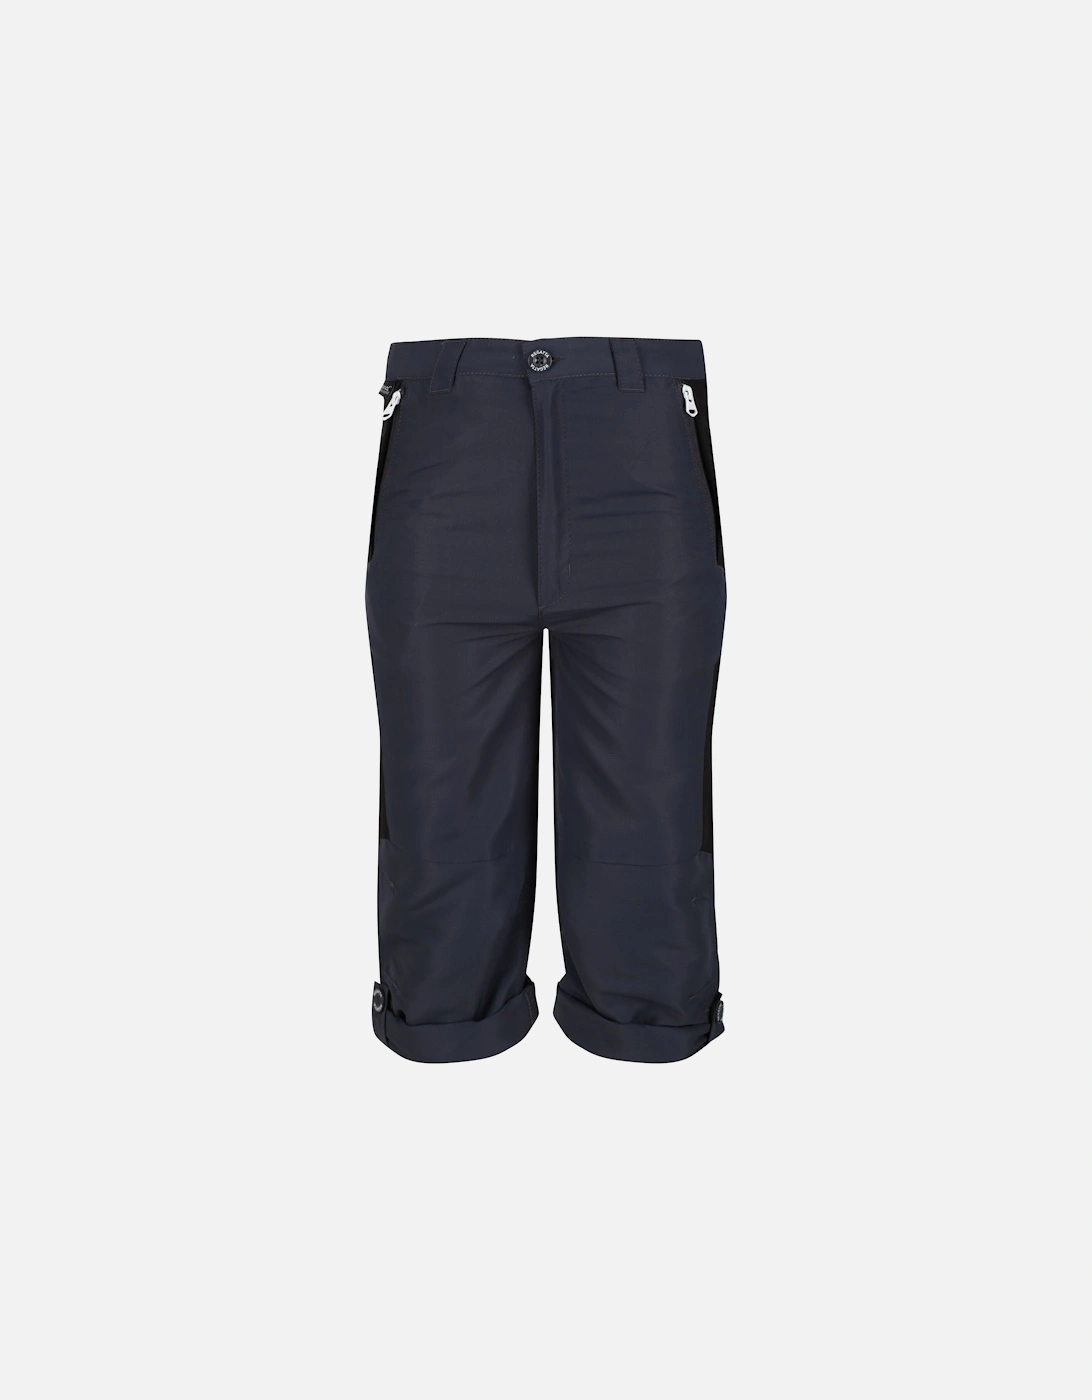 Childrens/Kids Sorcer V Mountain Trousers, 6 of 5